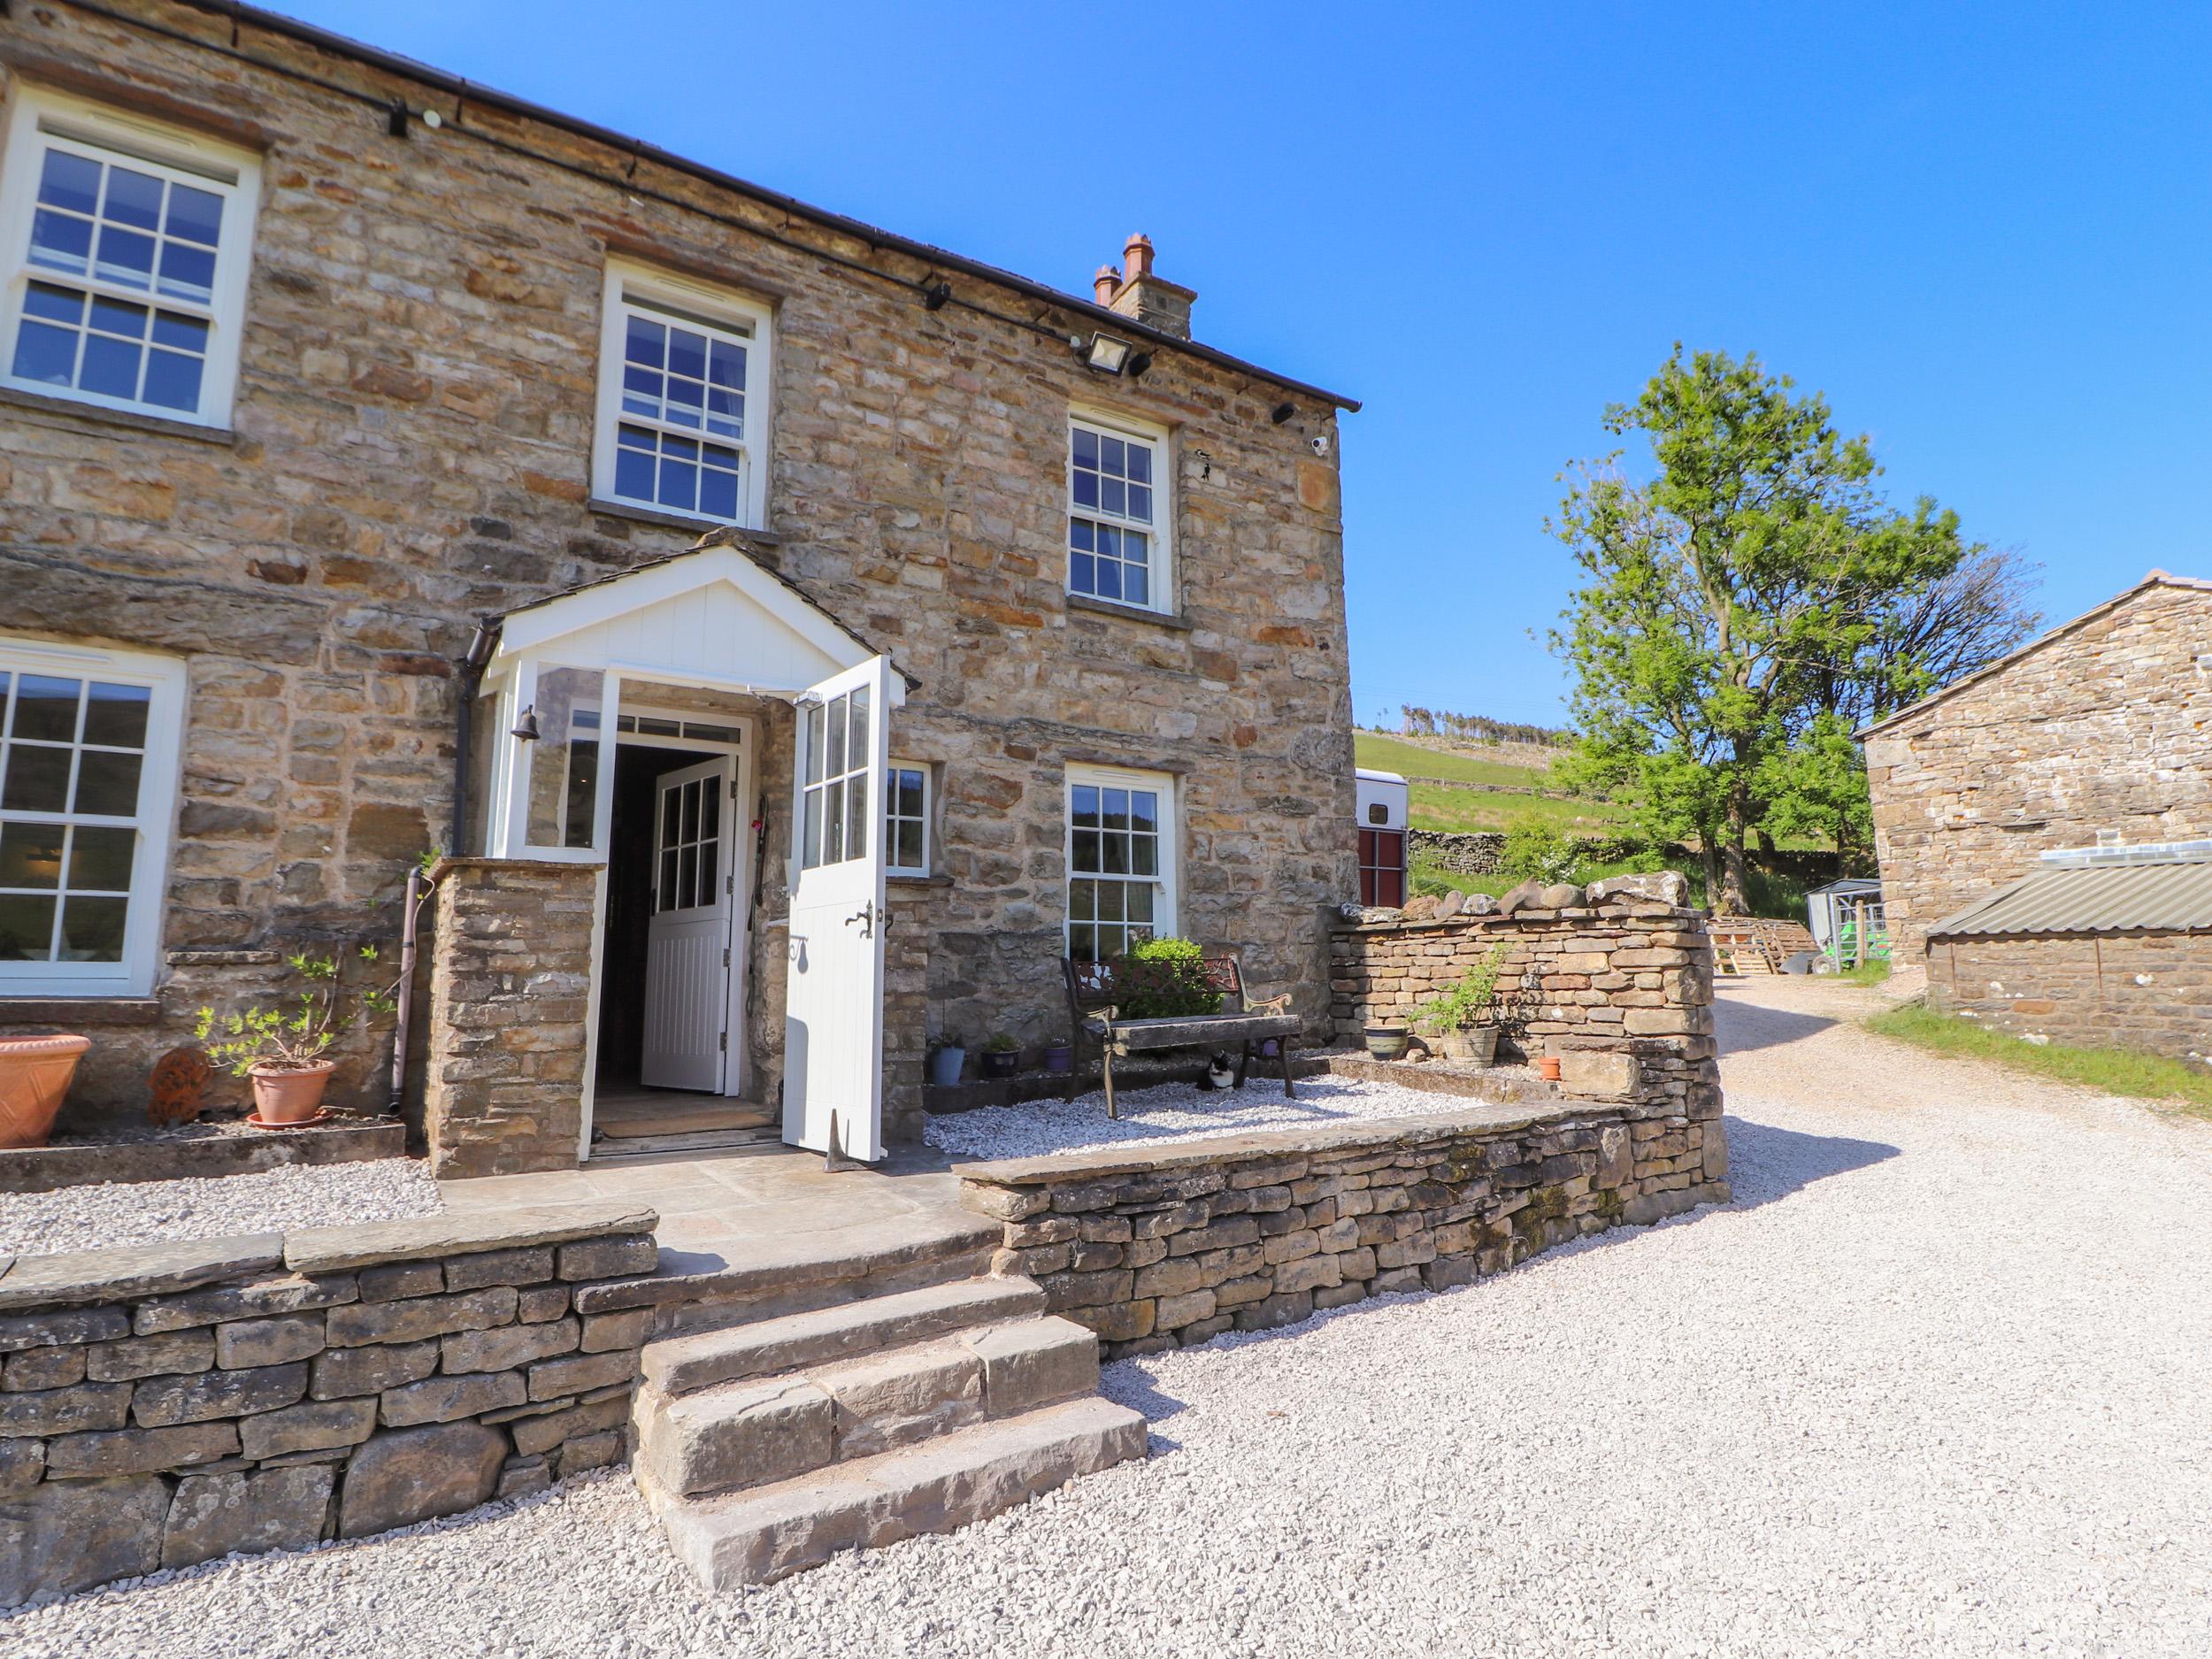 Holiday Cottage Reviews for Roger Pot - Holiday Cottage in Sedbergh, Cumbria